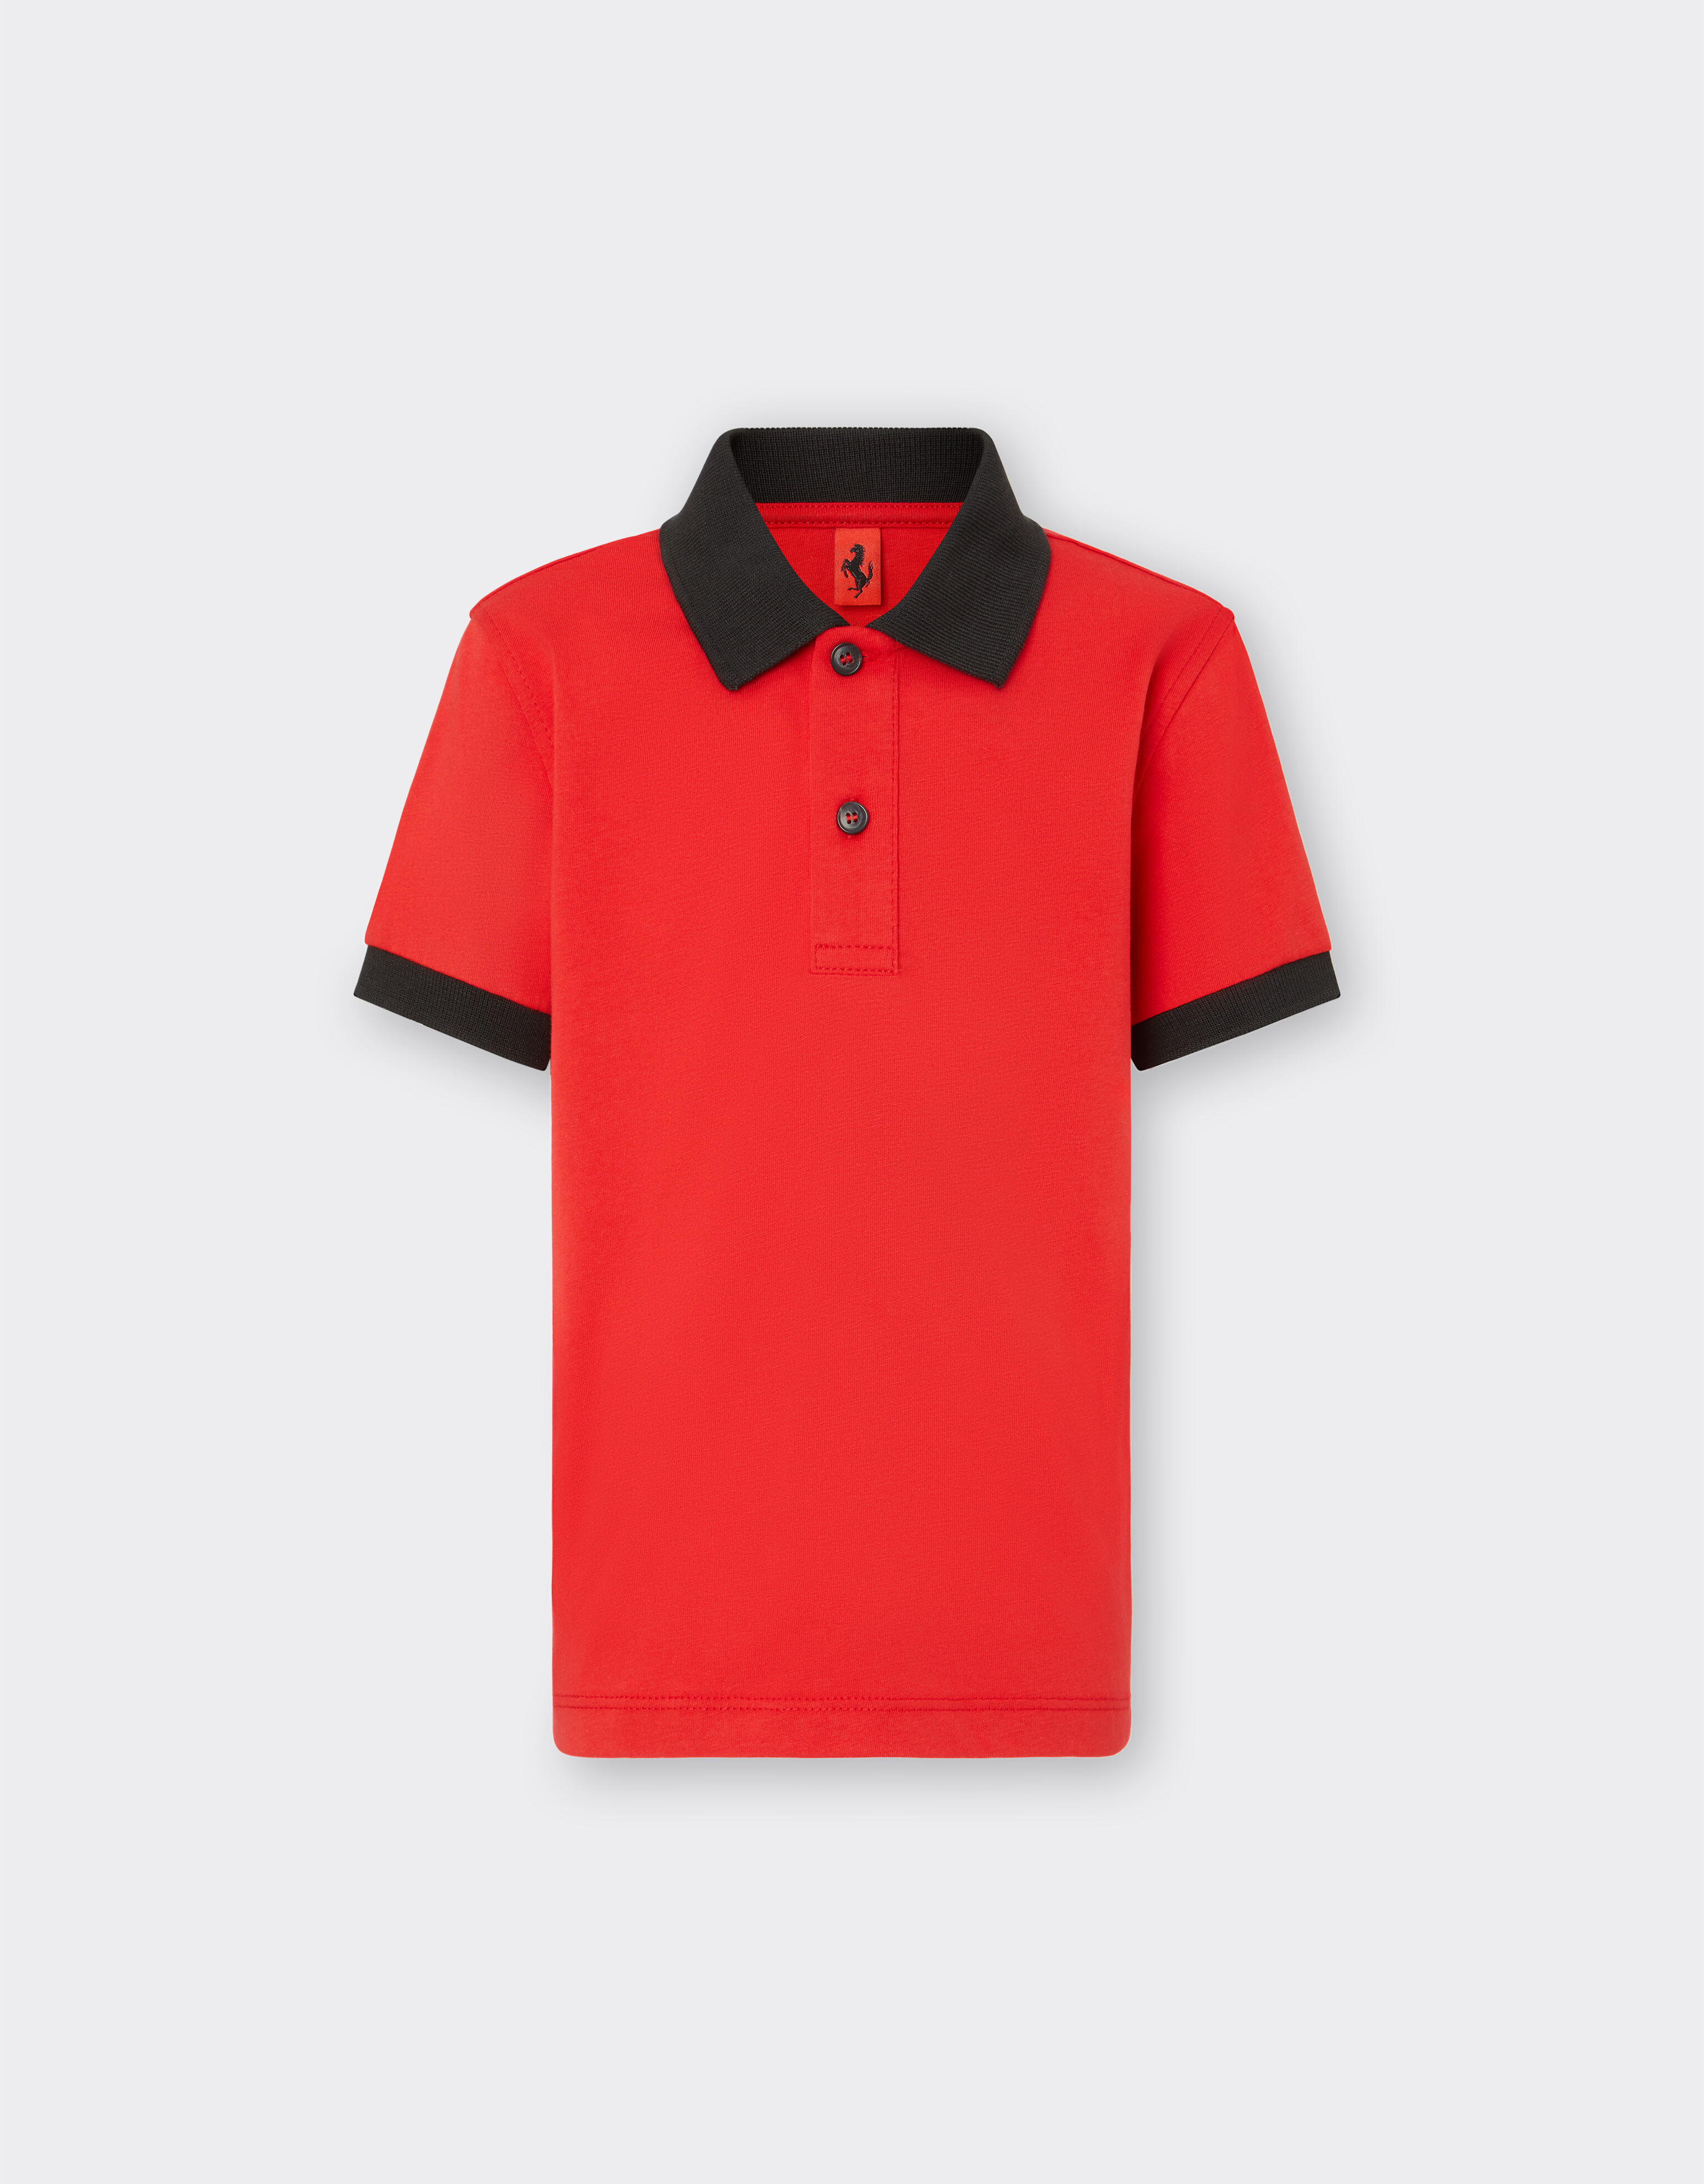 Ferrari Short sleeves -Contrast collar and cuffs - Front buttoning Rosso Corsa 红色 20160fK